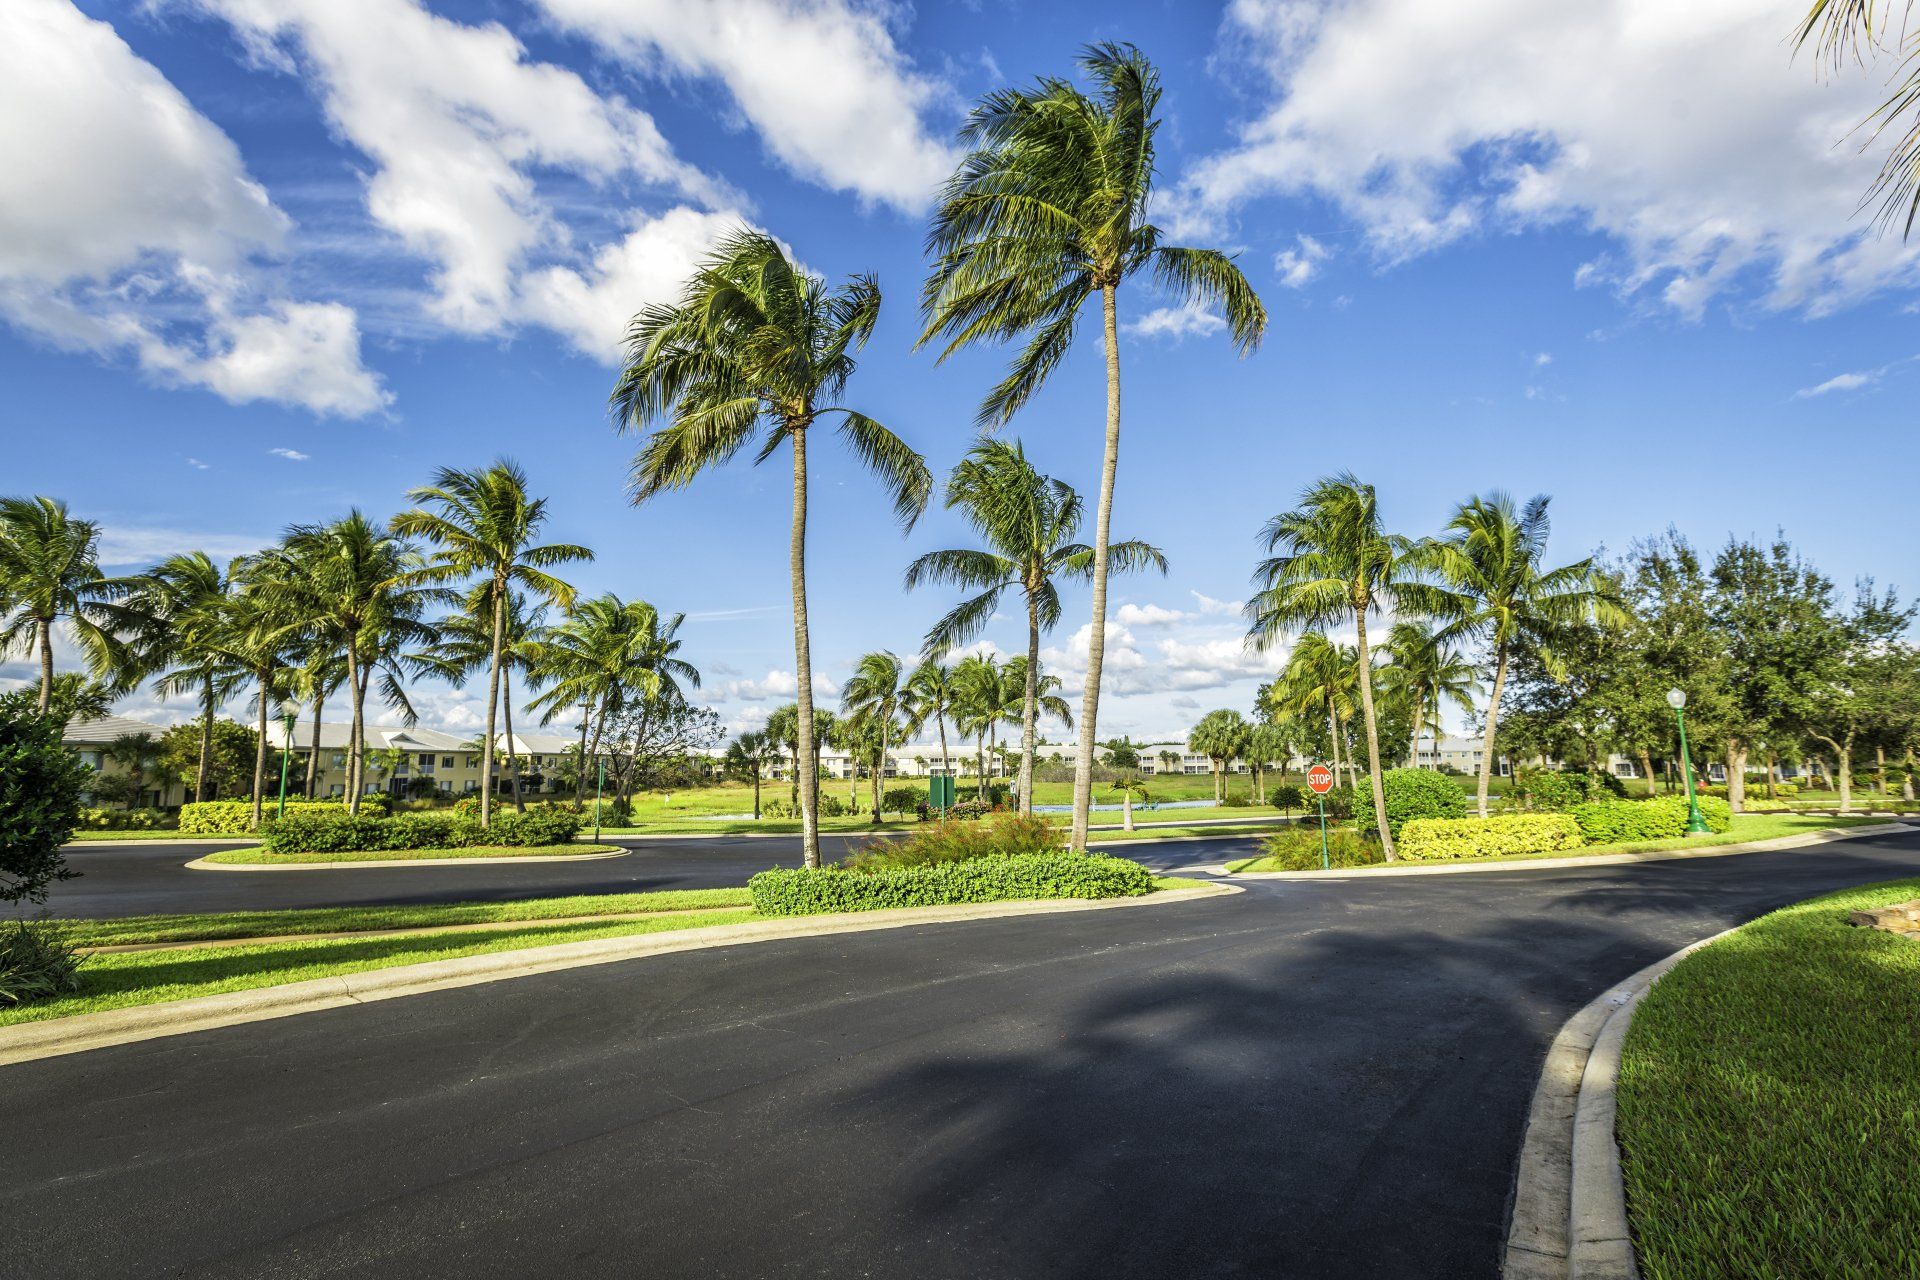 This newly paved road helps in cost savings, noise reduction, and comfort.